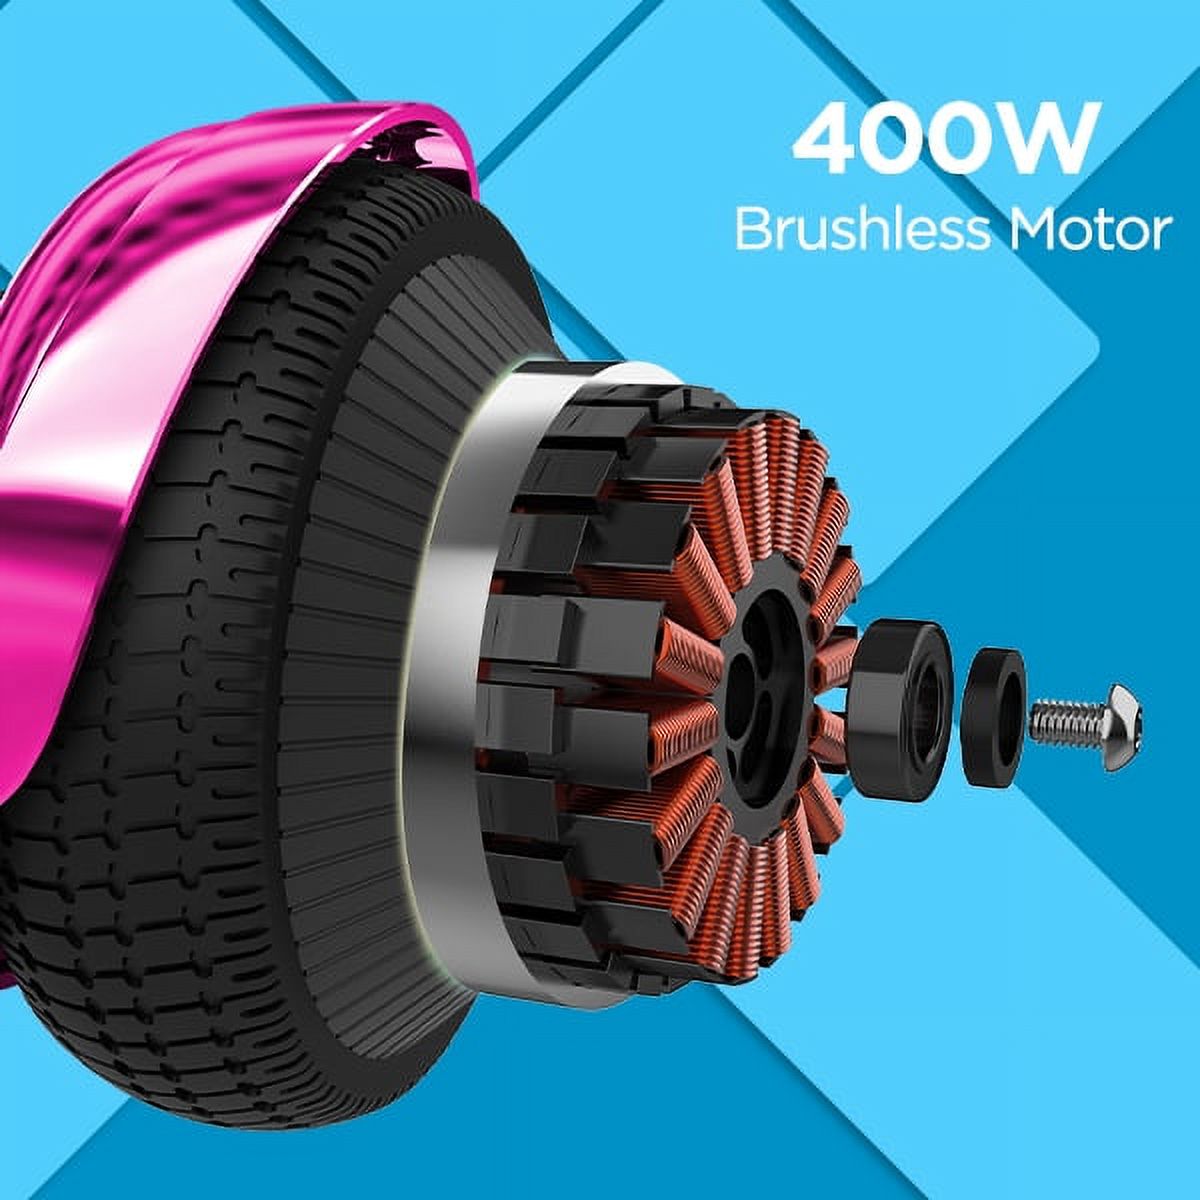 Hover-1 Allstar Hoverboard, Pink, 6.5in LED Wheels, LED Sensor Lights; Lithium-Ion 14 Cell Battery; Ideal for Boys and Girls 8+ and Less Than 220 lbs, UL Certified Electric Hoverboard - image 3 of 9